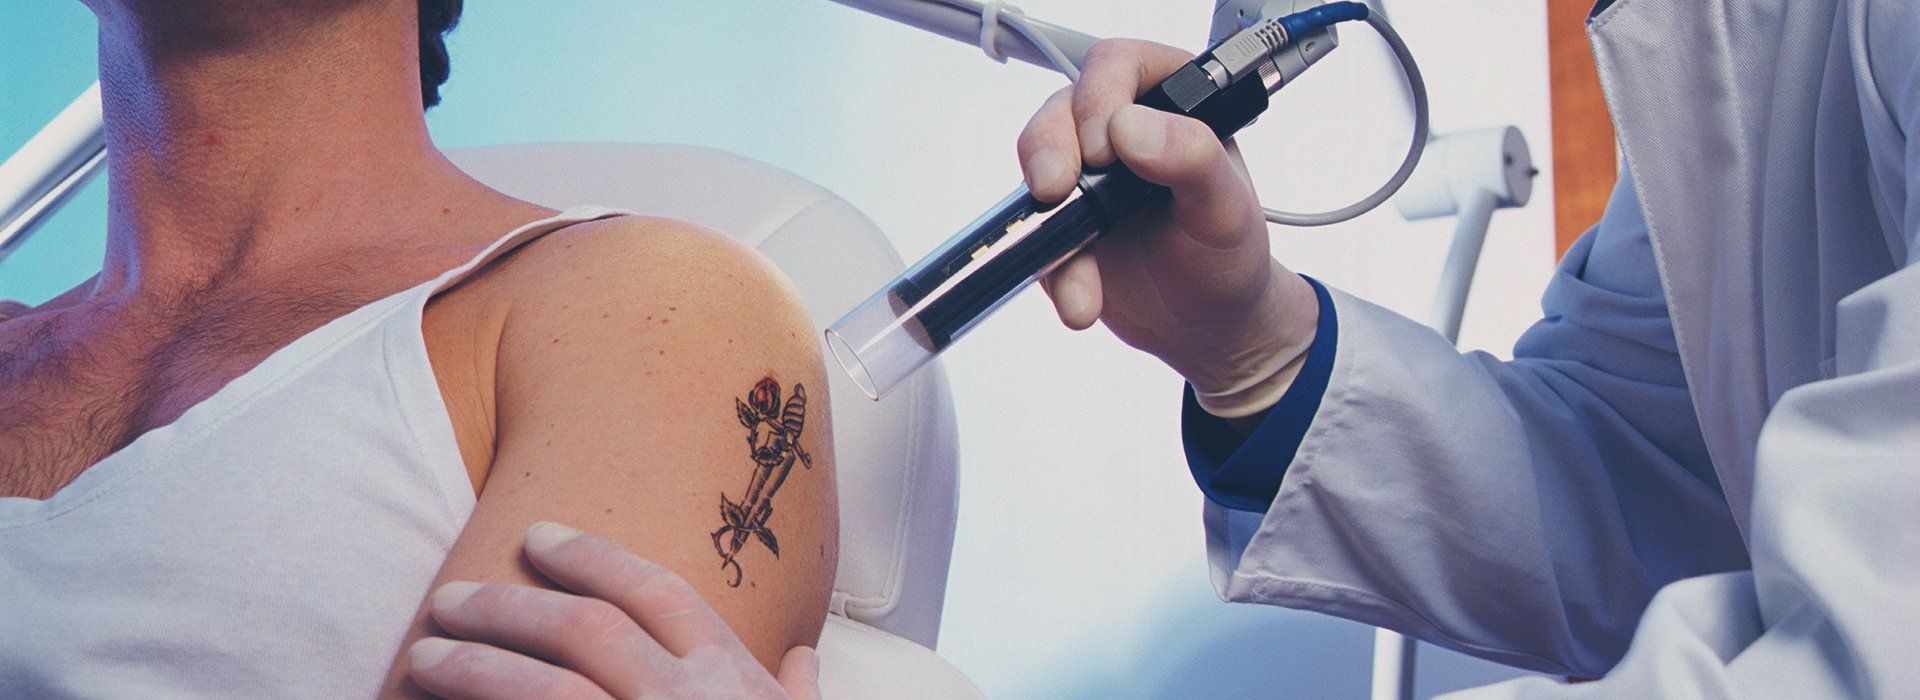 Highland Laser Clinic: Tattoo Removal Experts in the North of Scotland